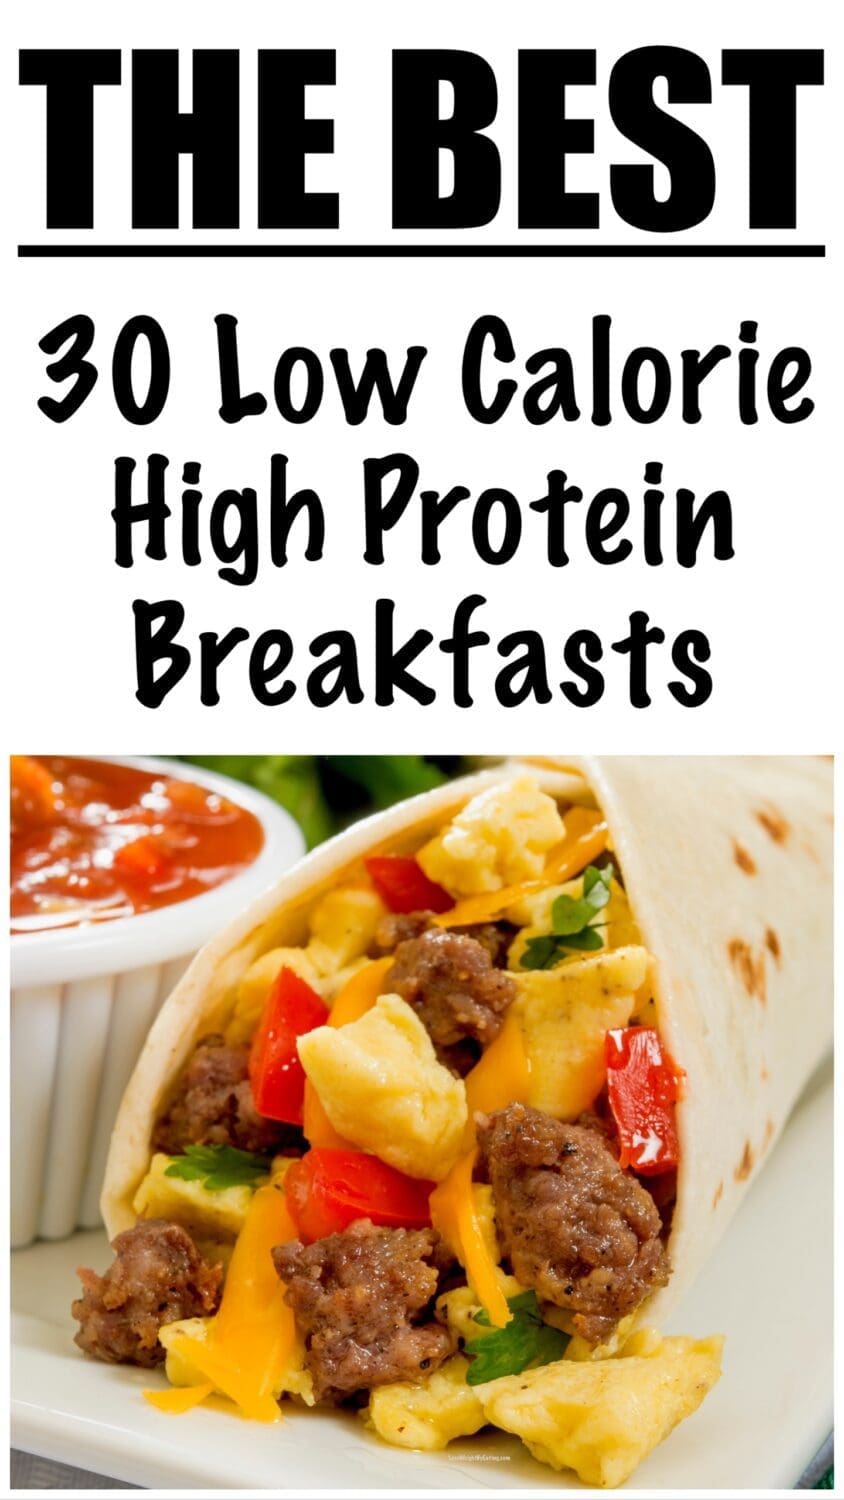 Low Calorie High Protein Breakfast Recipes